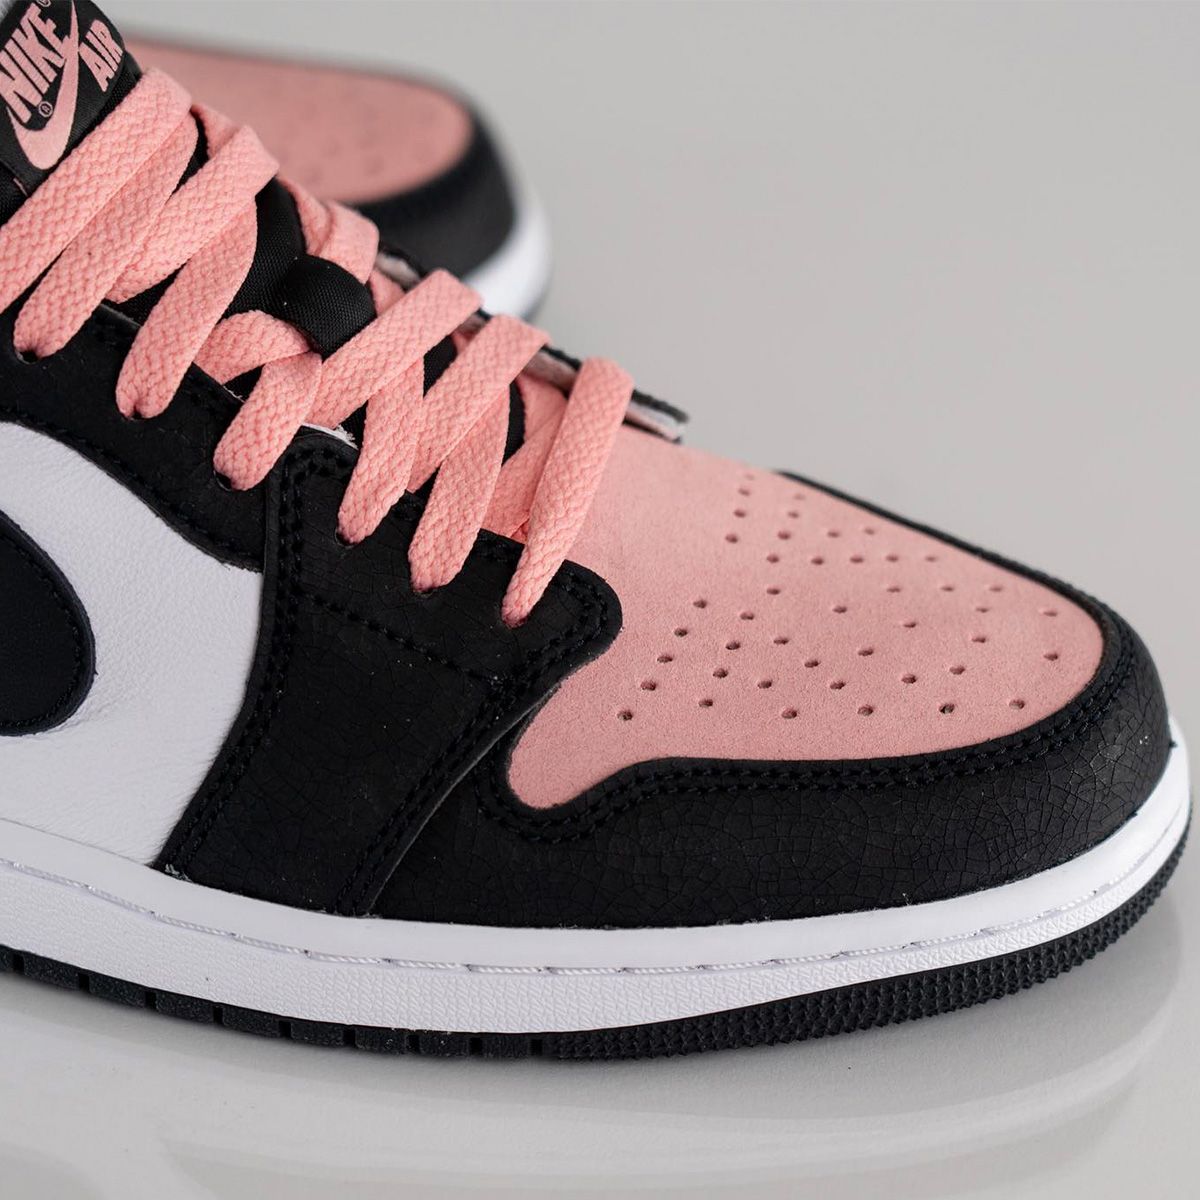 Where to Buy the Air Jordan 1 Low OG “Bleached Coral” | House of Heat°